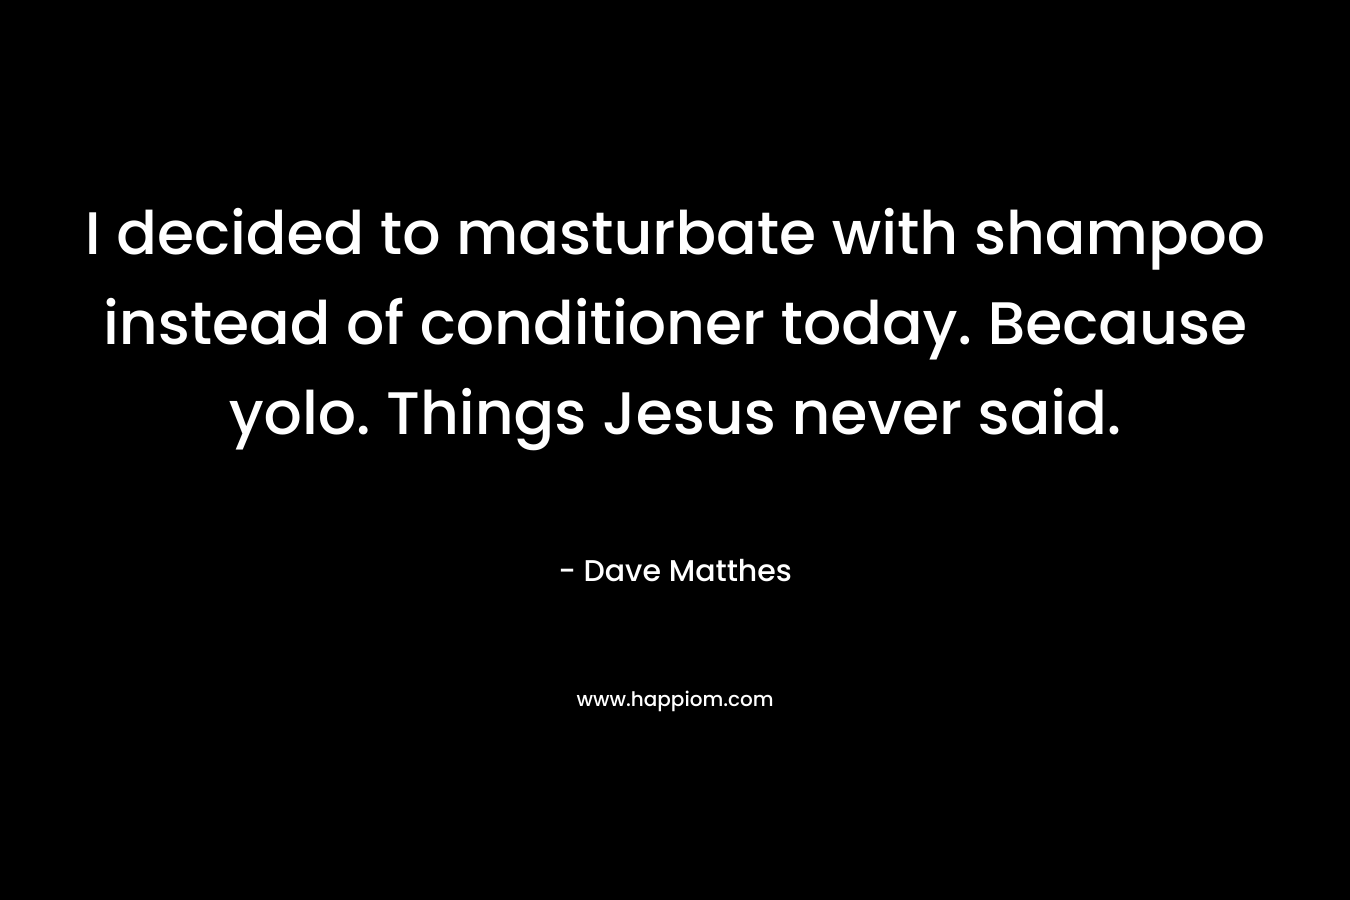 I decided to masturbate with shampoo instead of conditioner today. Because yolo. Things Jesus never said.